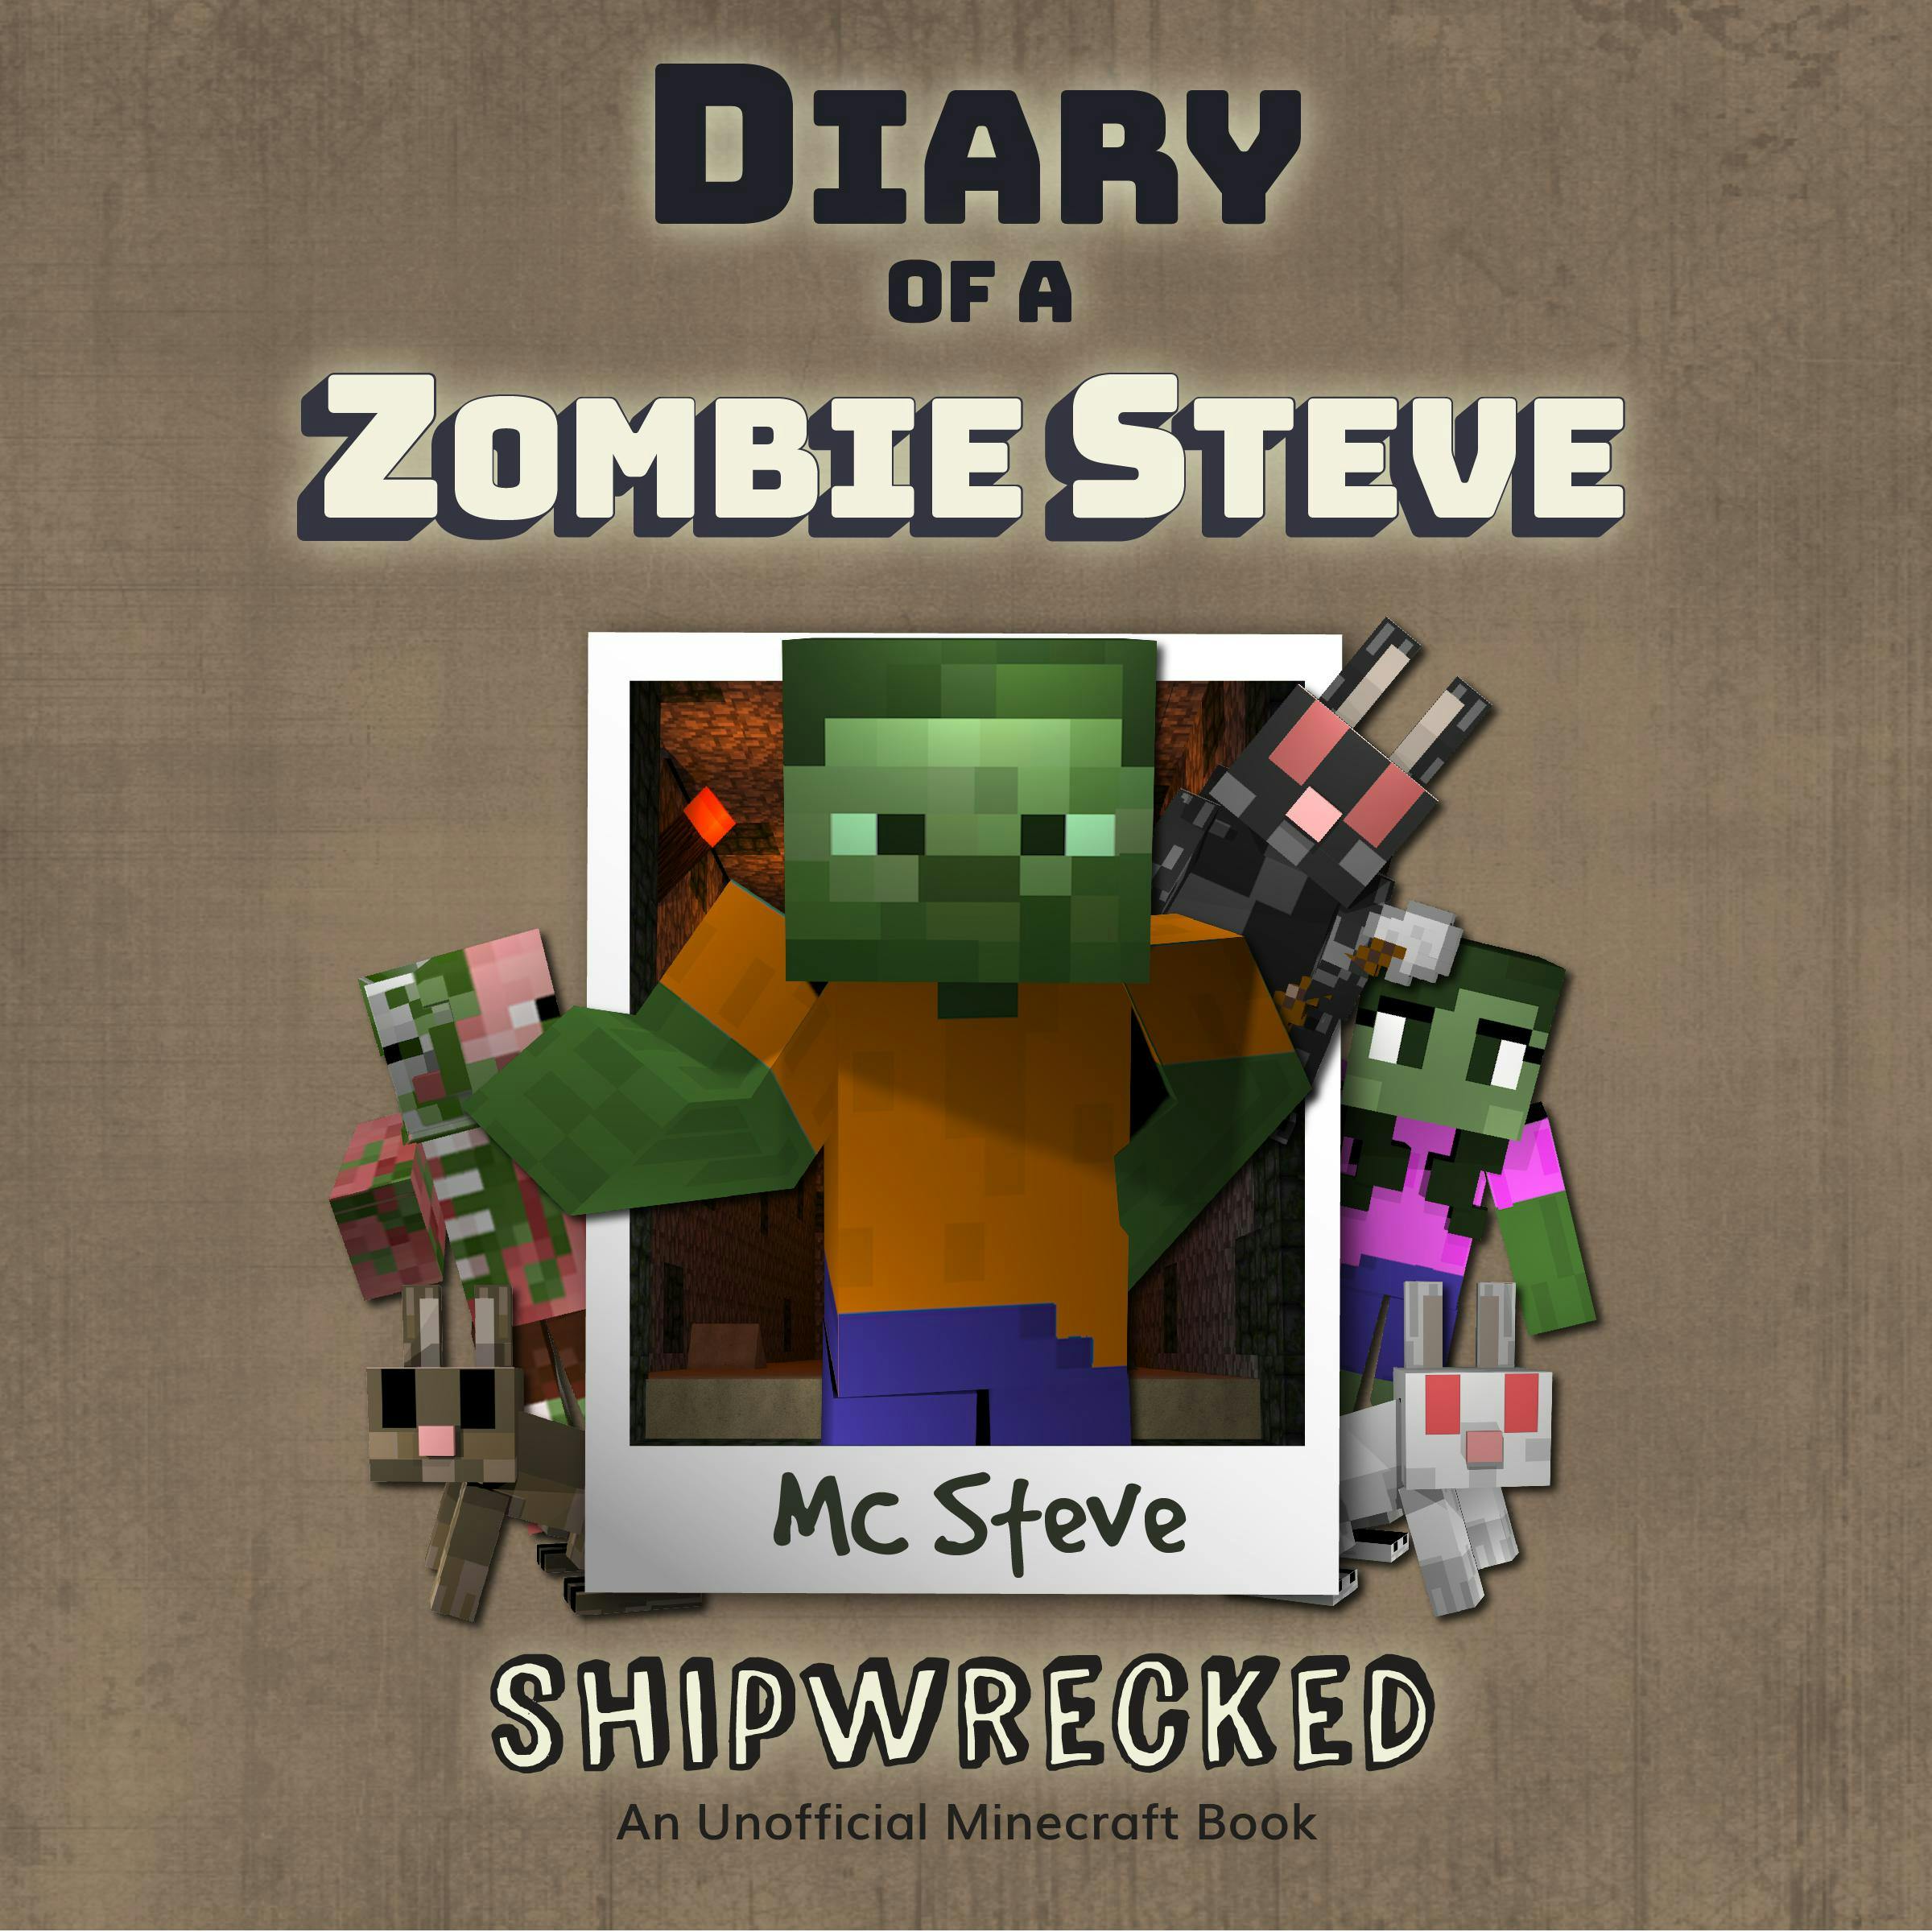 Diary Of A Zombie Steve Book 3 - Shipwrecked: An Unofficial Minecraft Book - MC Steve